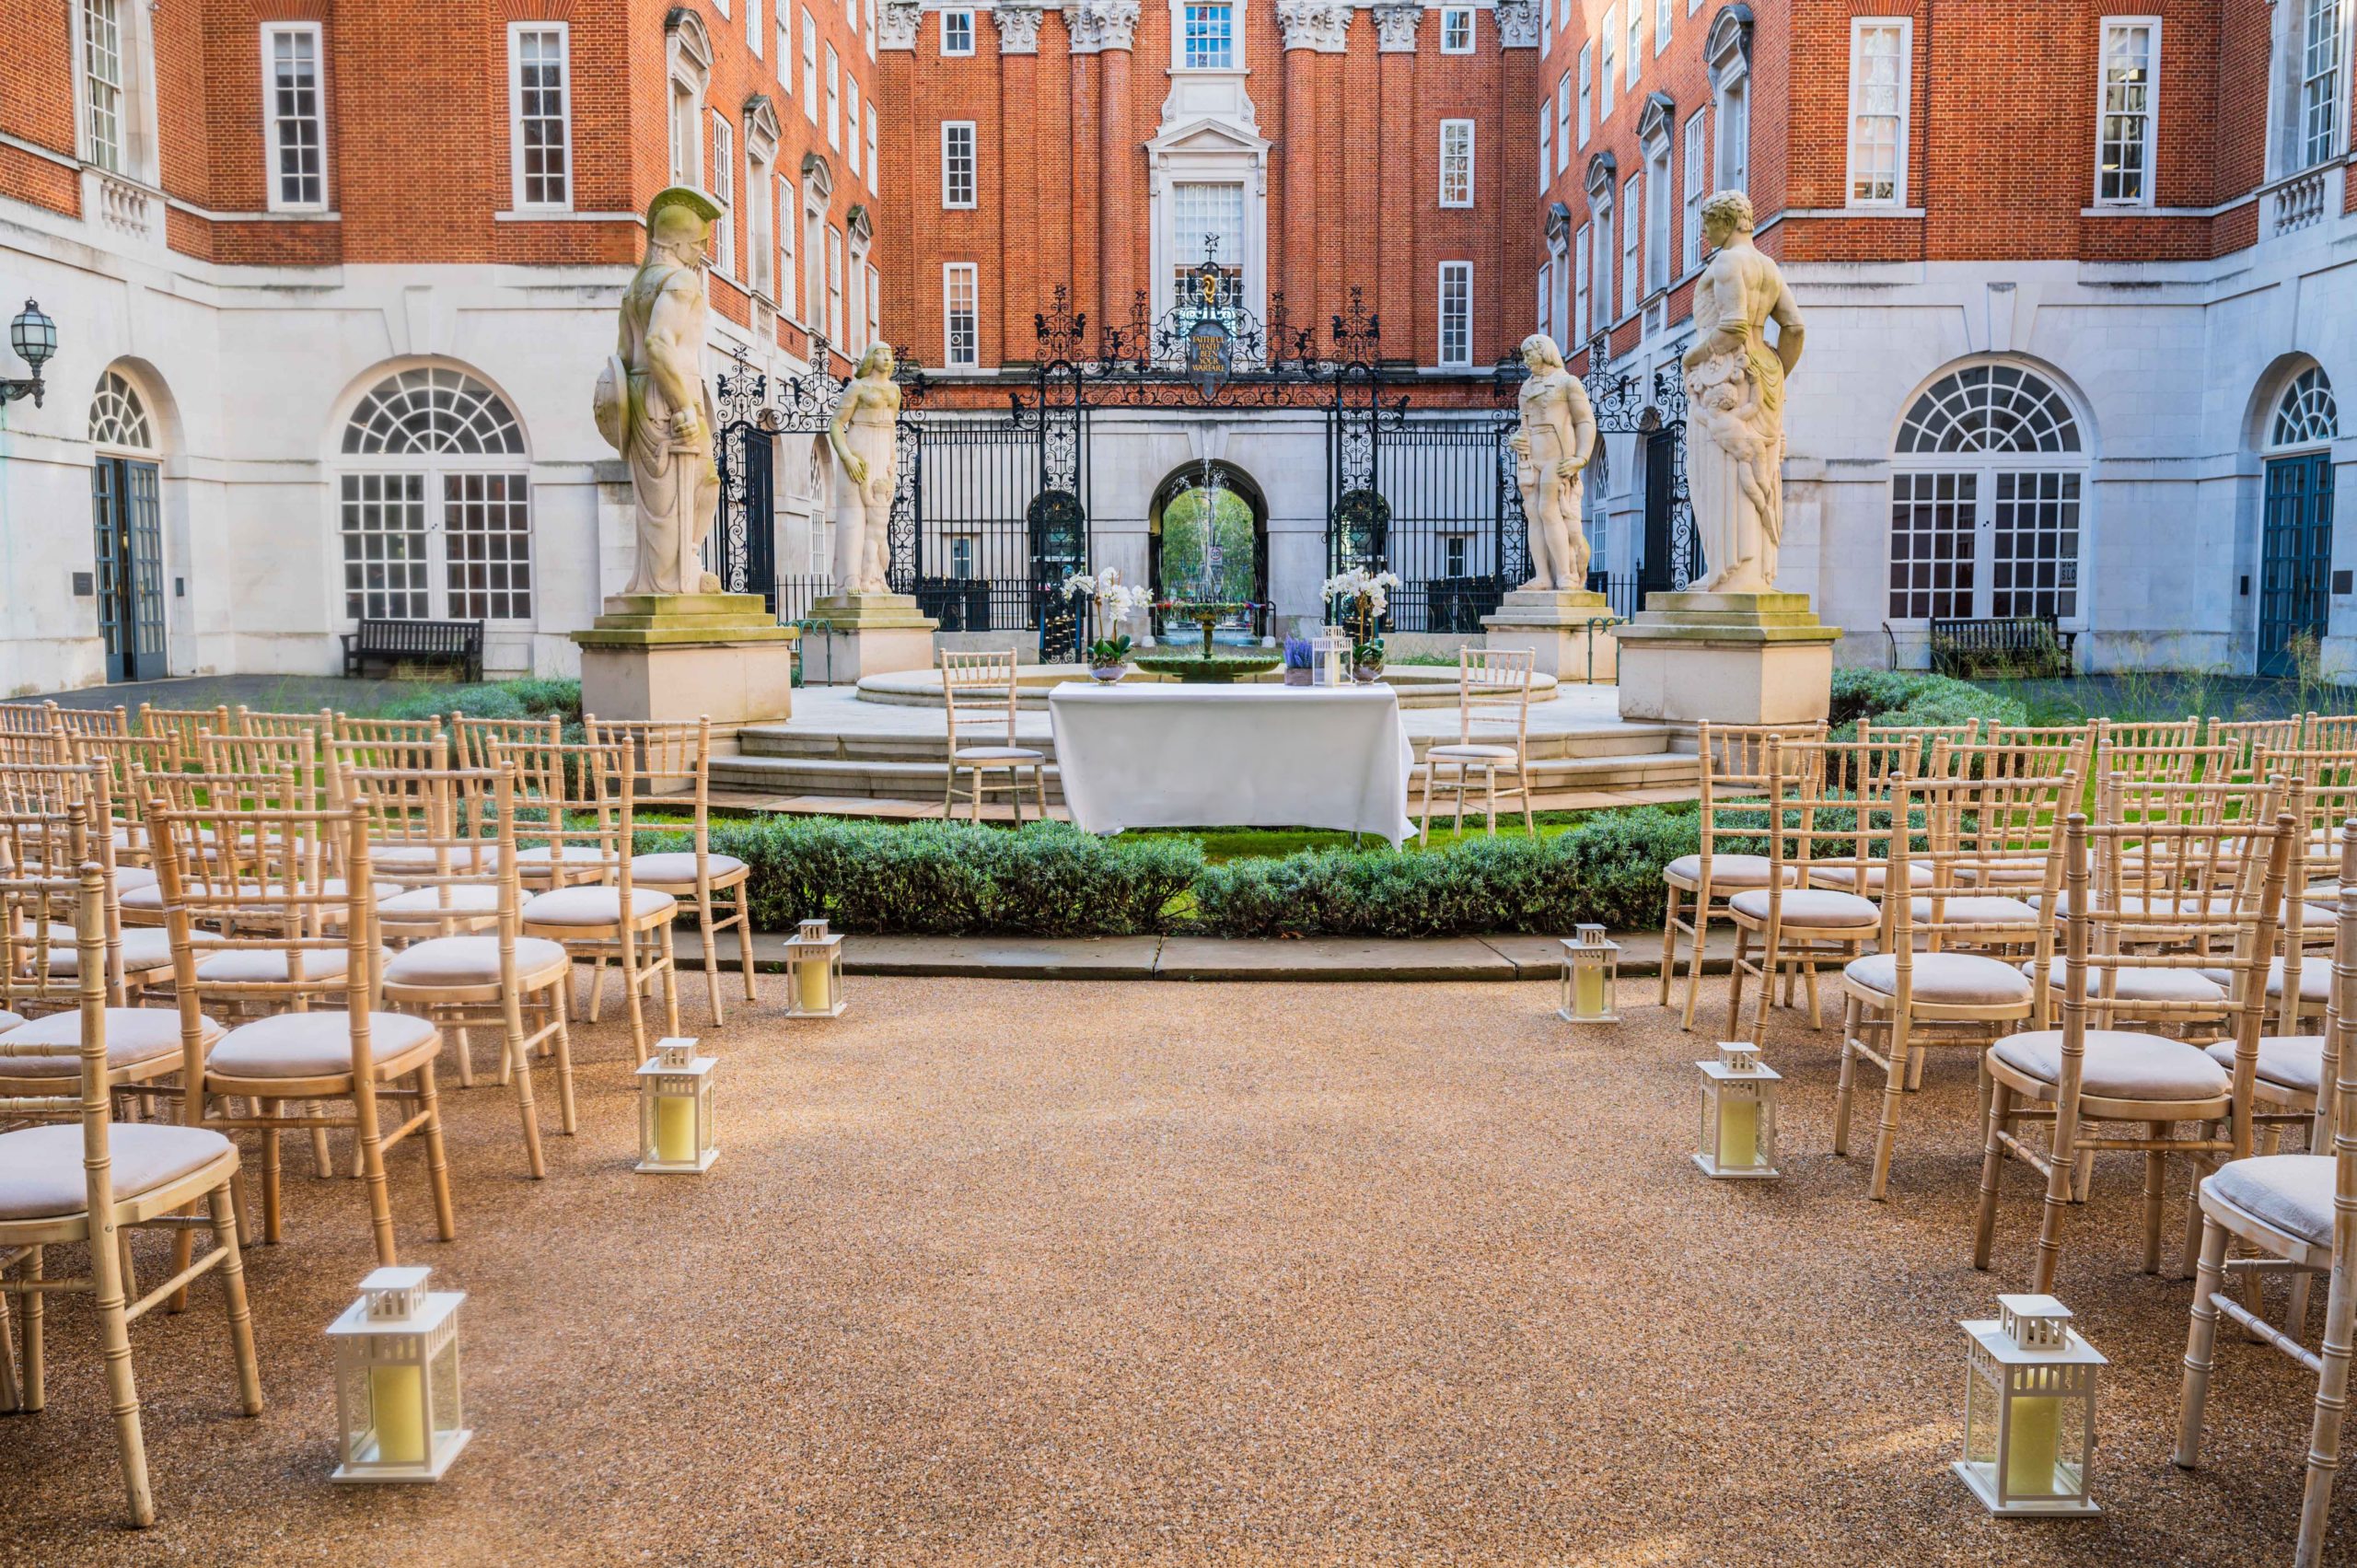 Tying the Knot Under the Open Sky: BMA House’s Courtyard Welcomes Wedding Ceremonies